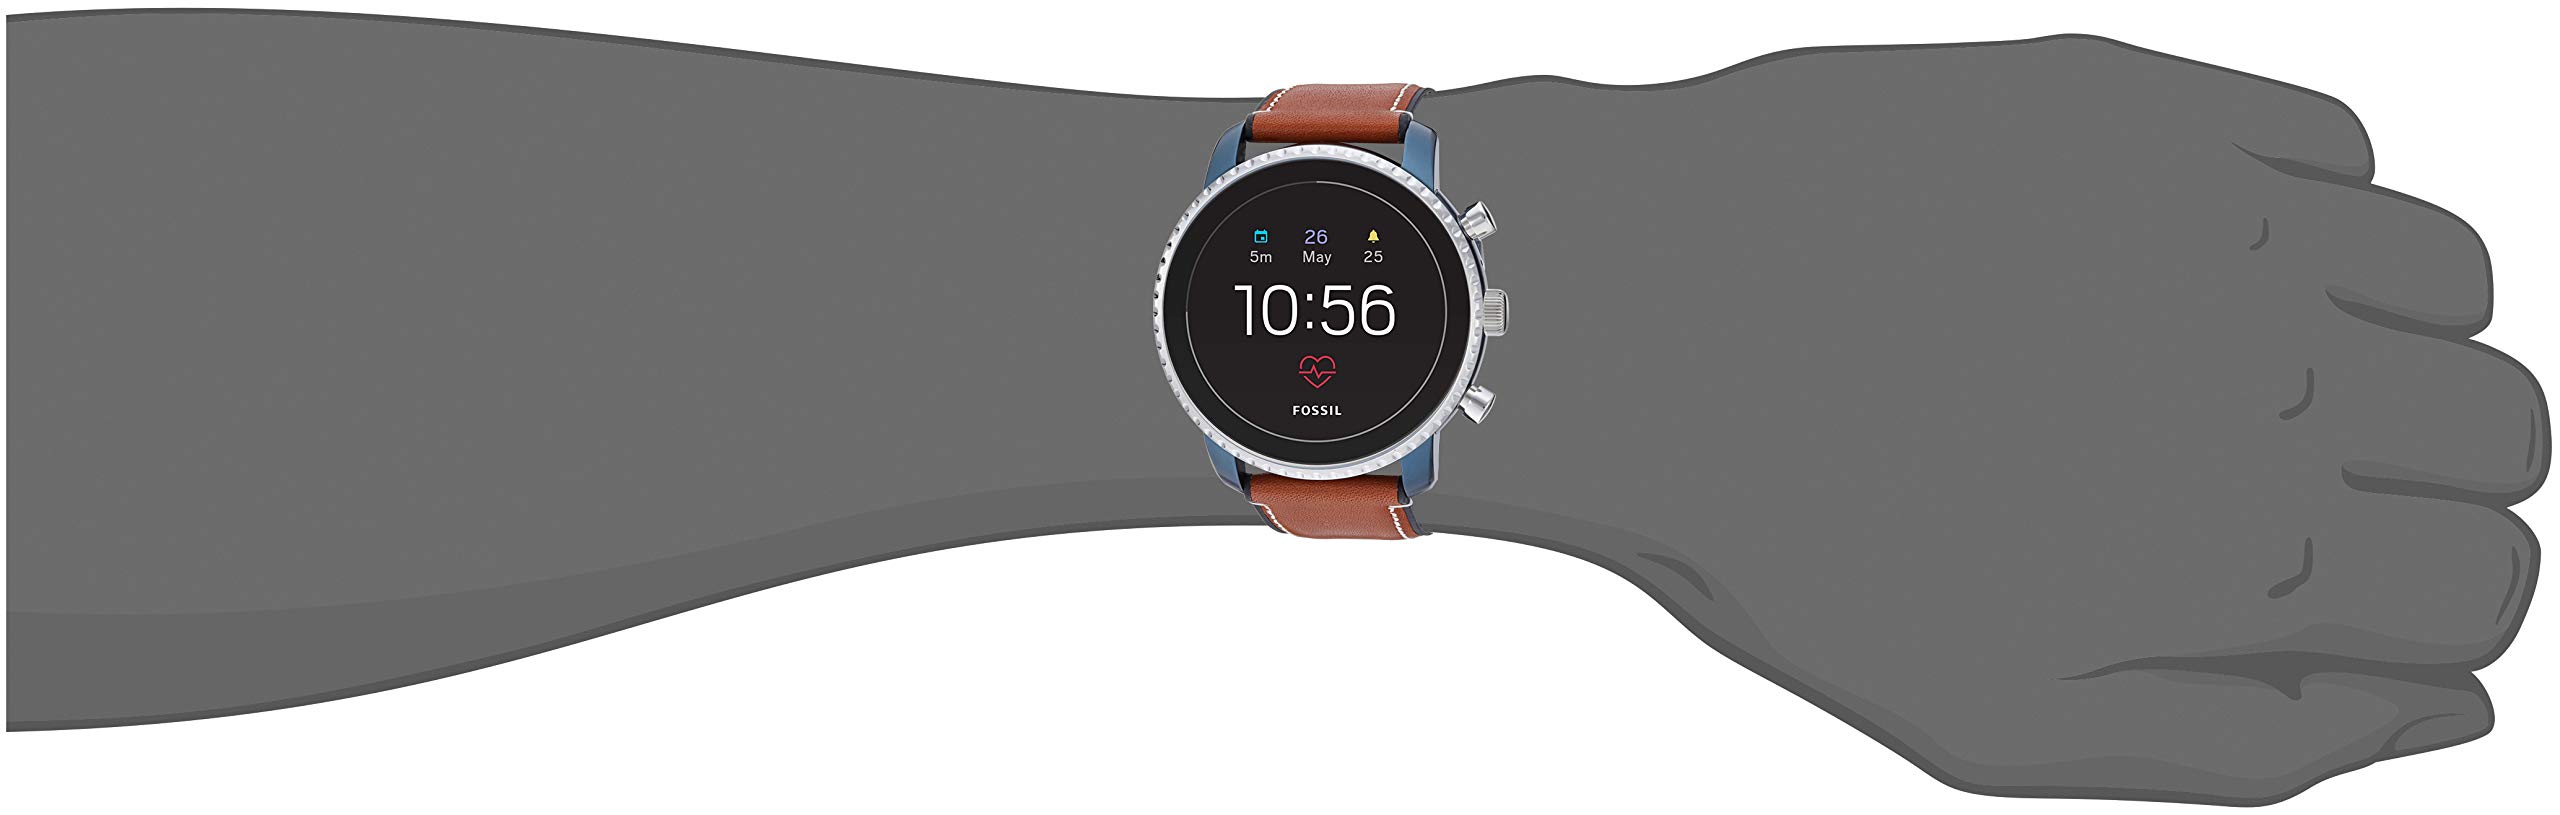 Fossil Men's Gen 4 Explorist HR Stainless Steel Touchscreen Smartwatch with Heart Rate, GPS, NFC, and Smartphone Notifications